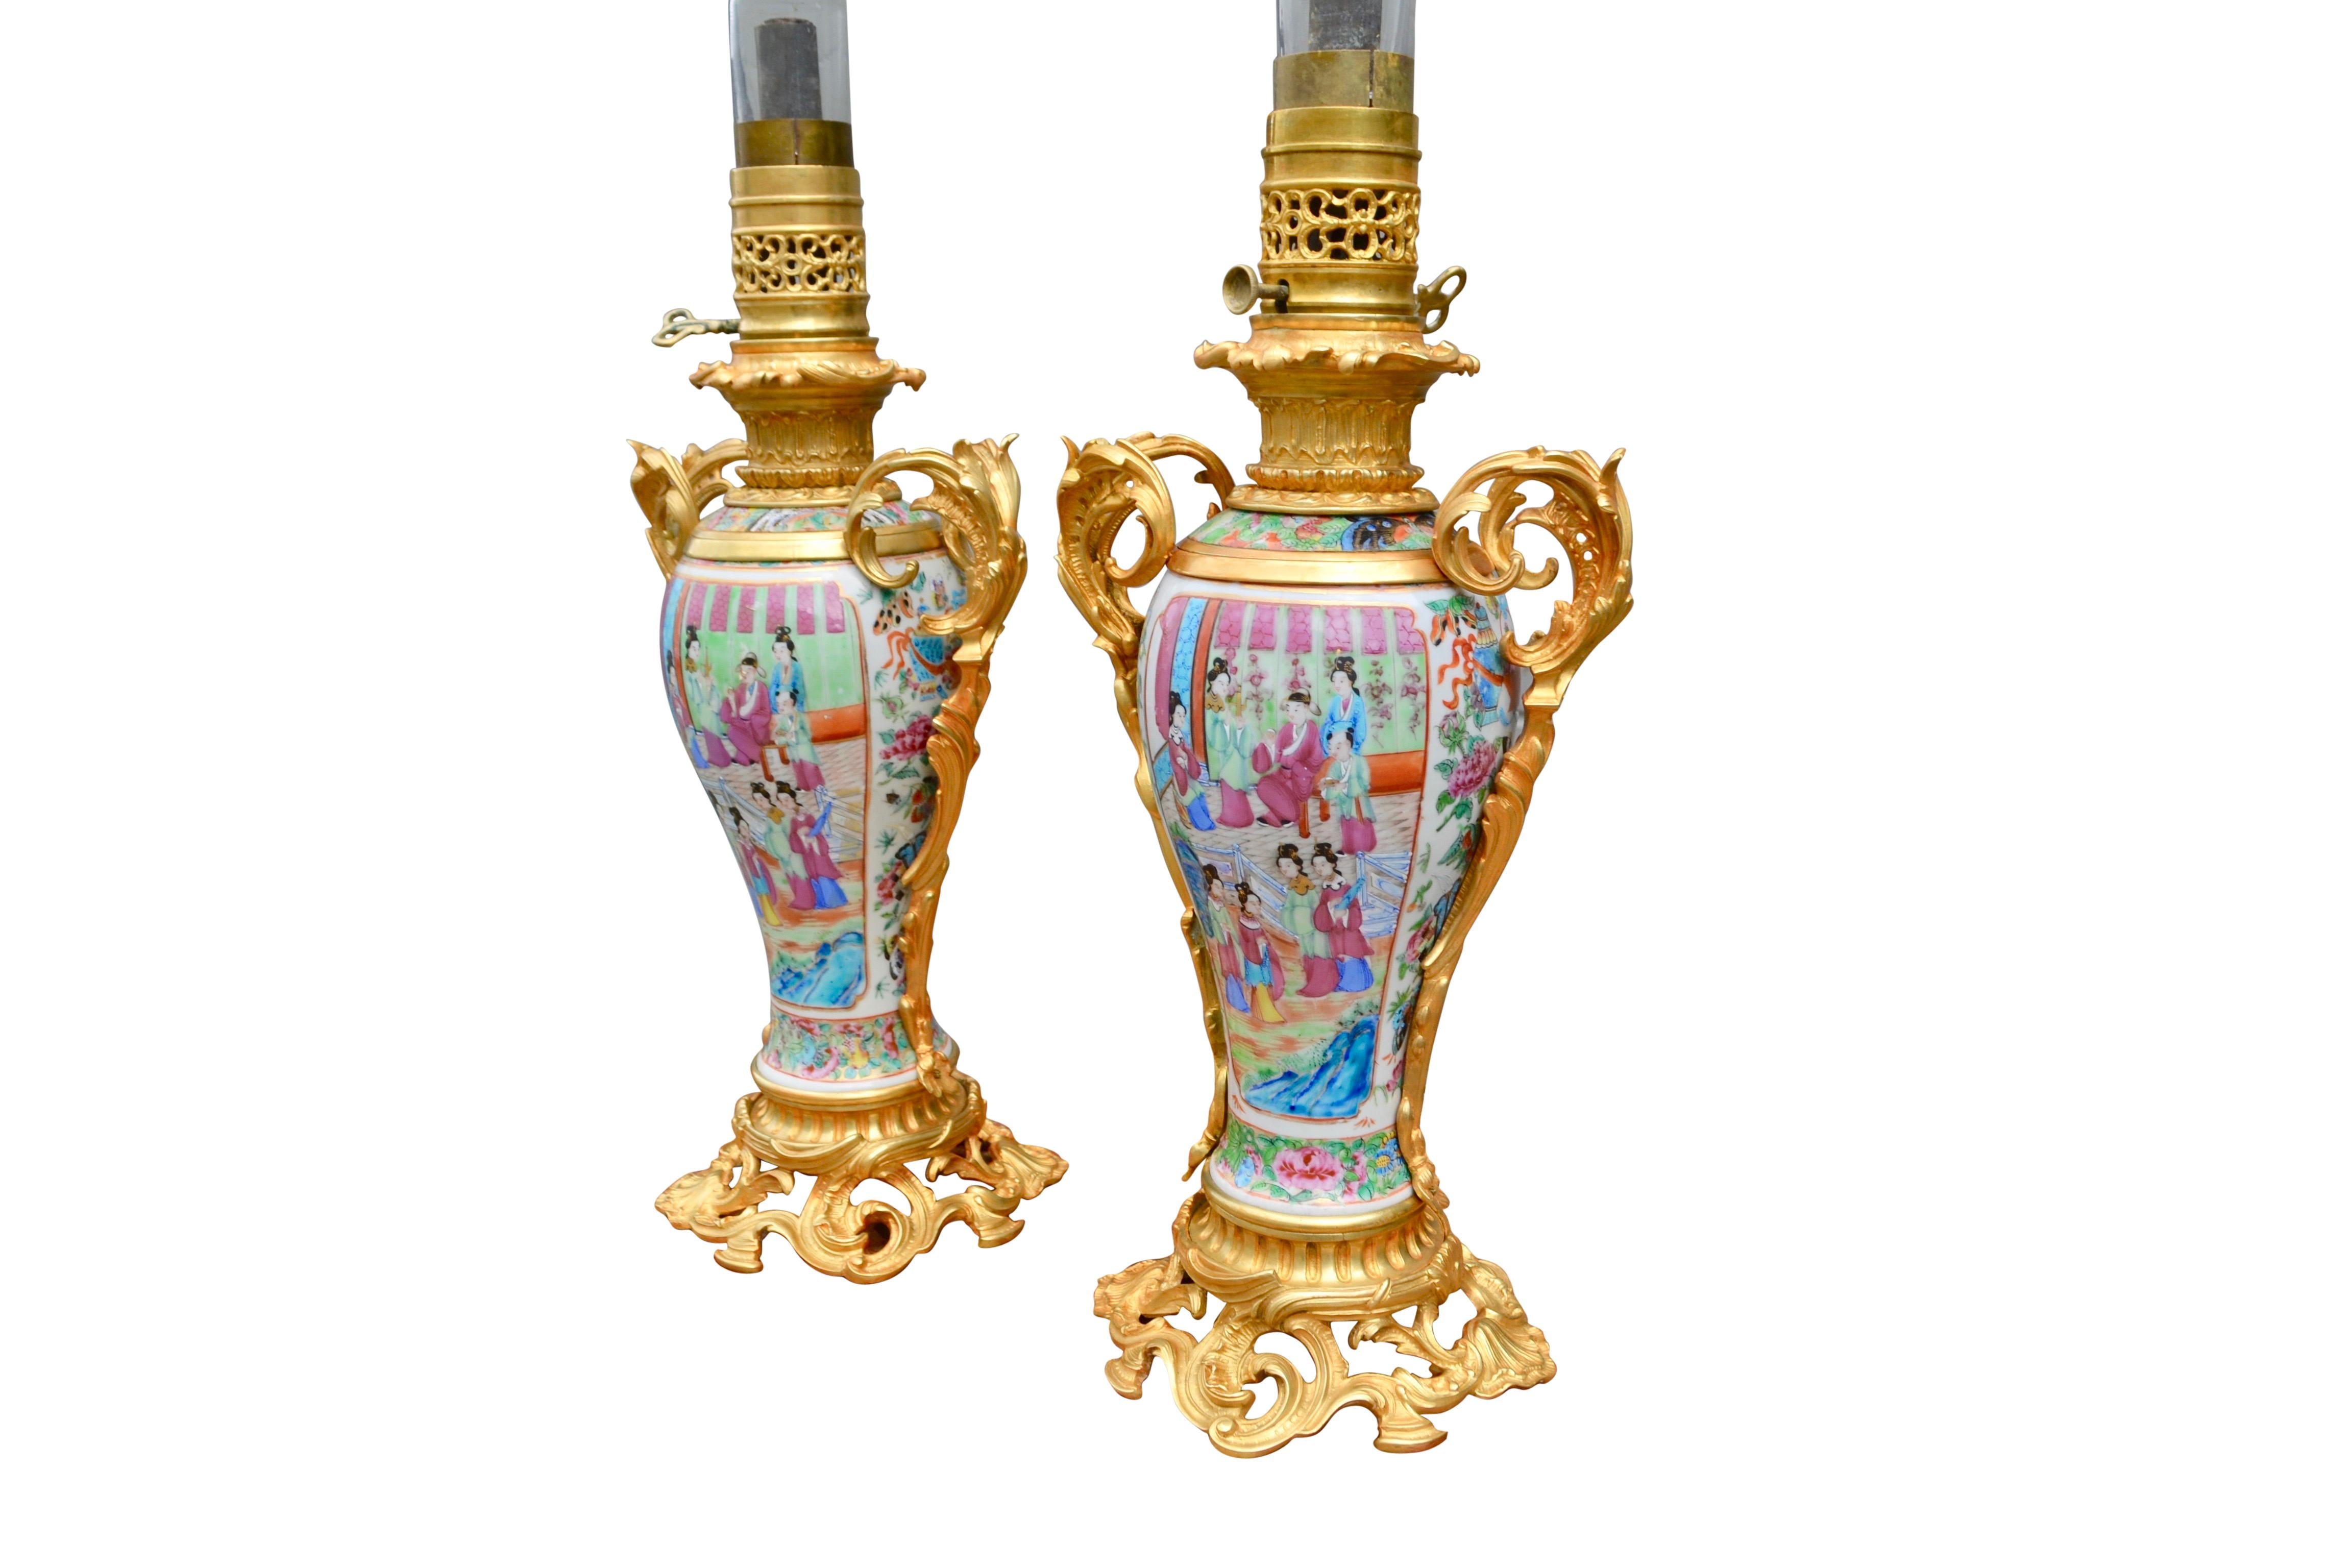 Rare Pair of Famille Rose Porcelain and Ormolu Napoleon III Oil Lamps For Sale 6